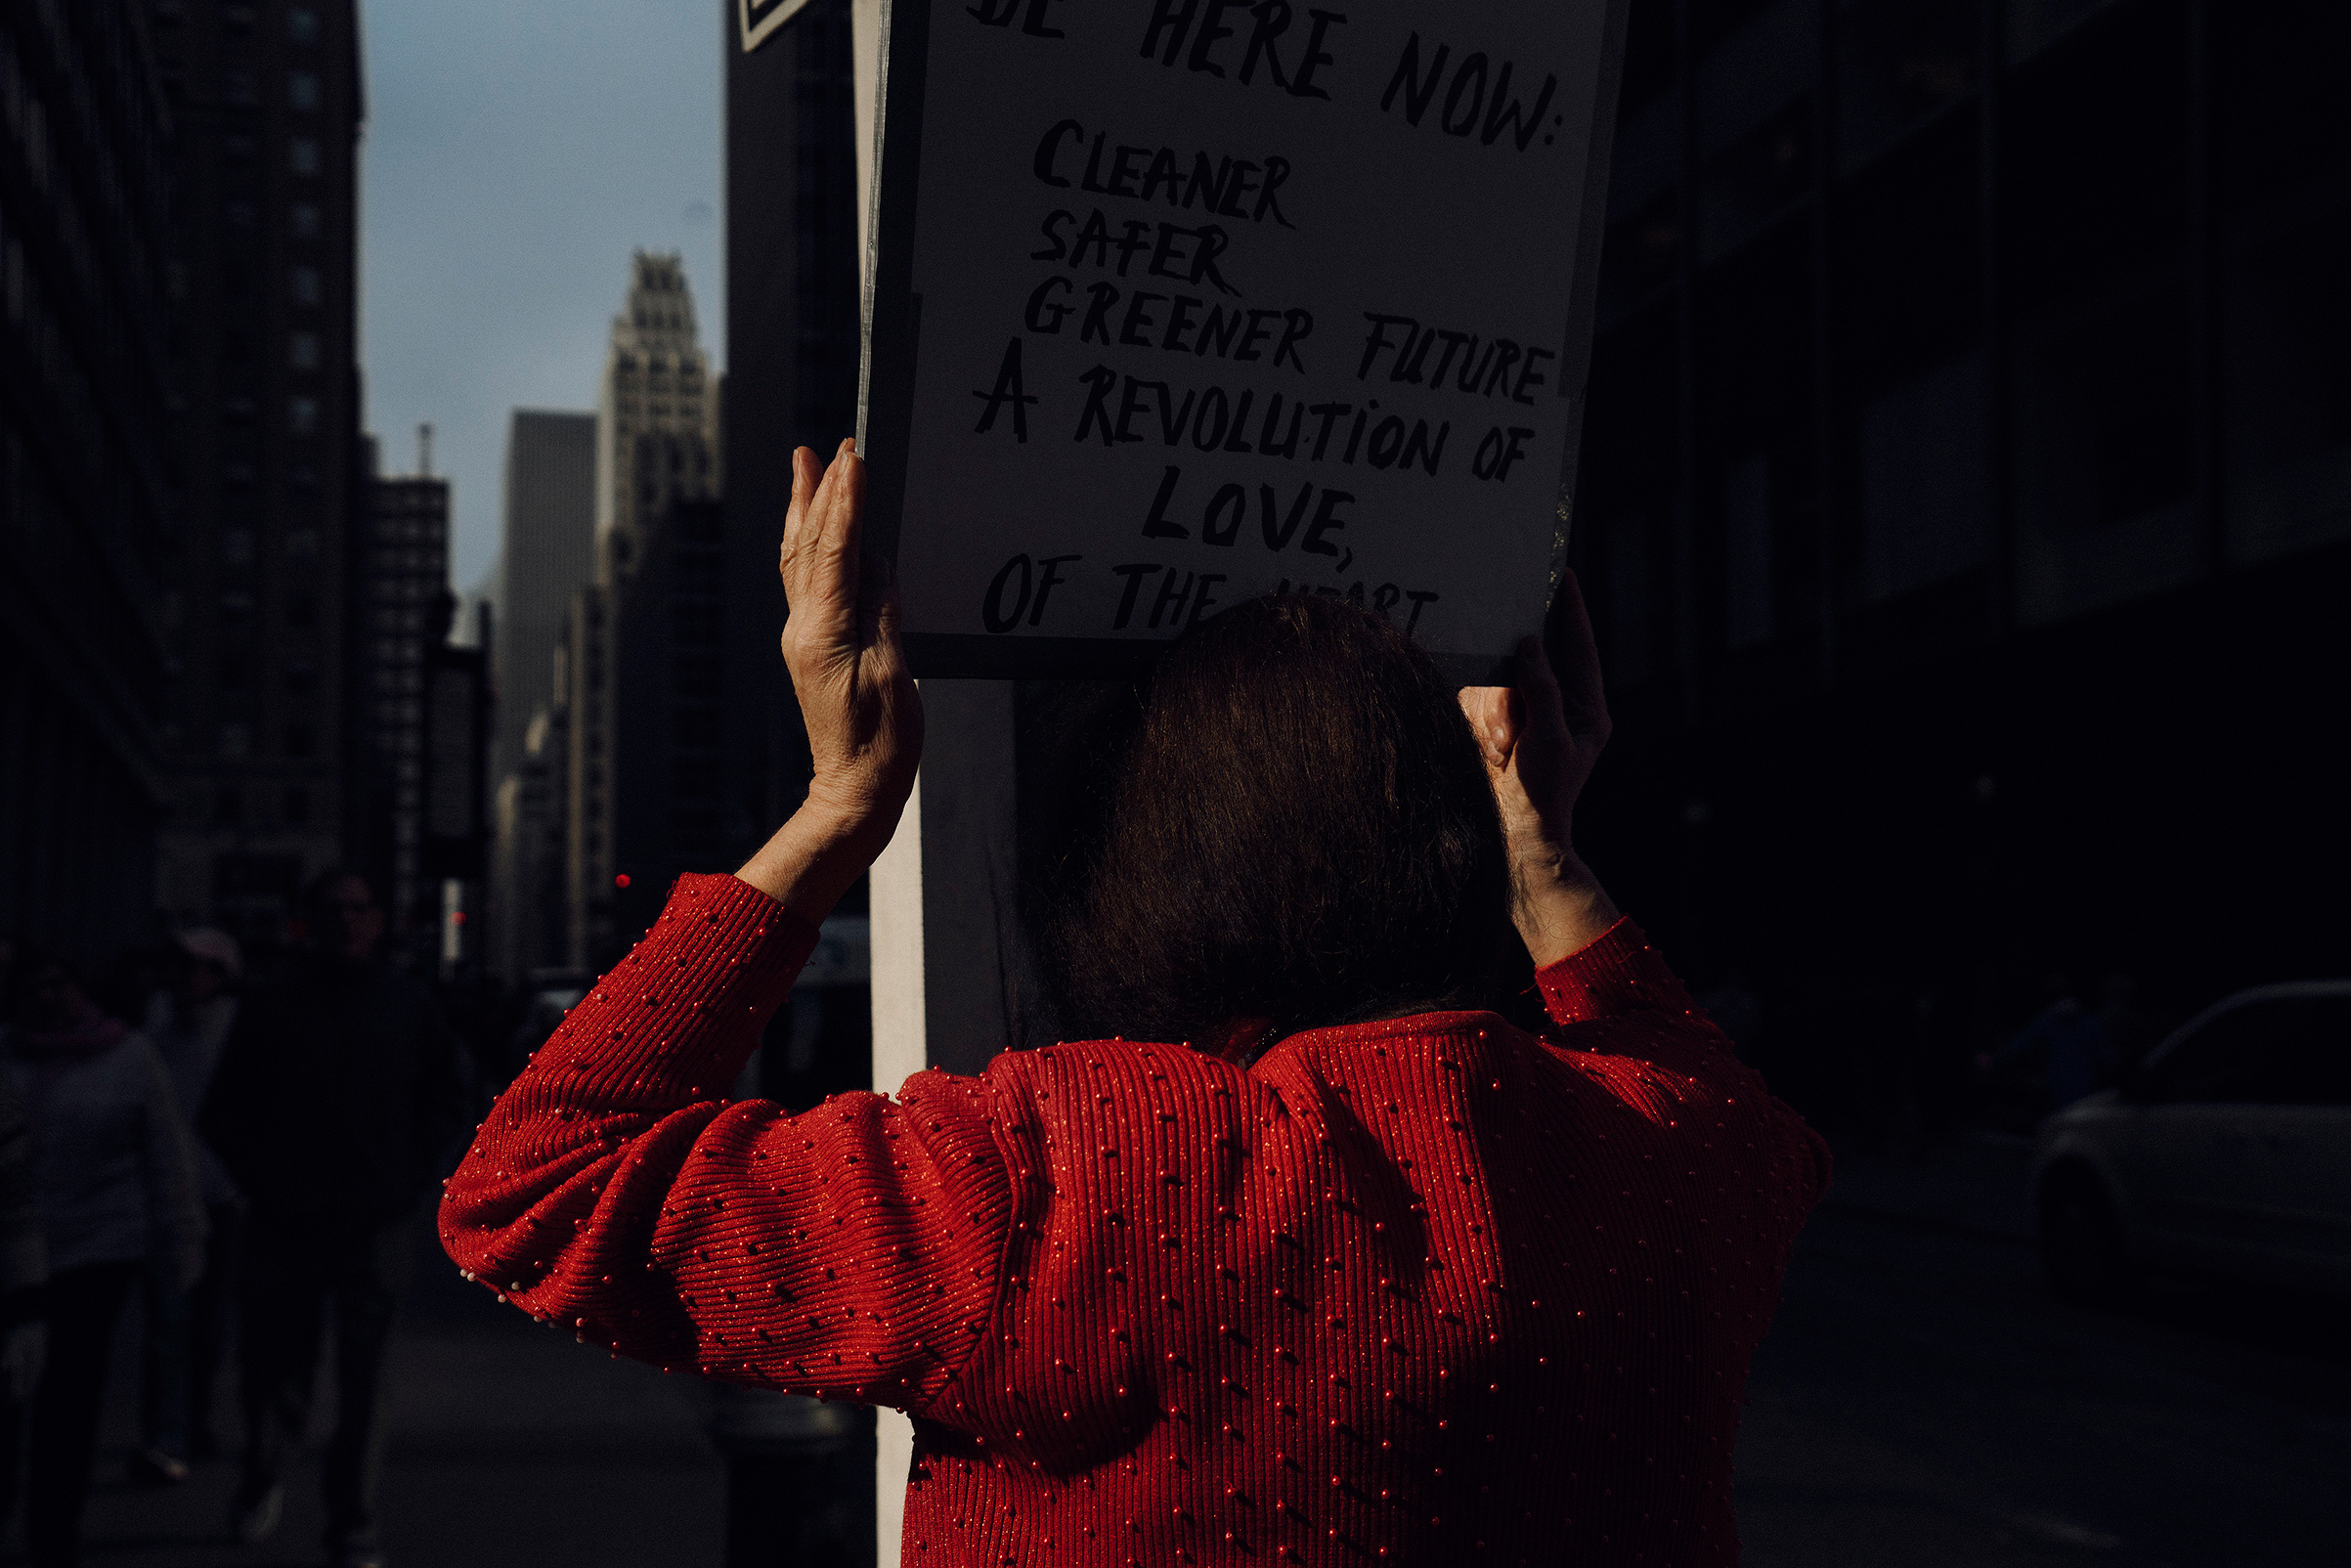 Women's March in Midtown the day after Donald Trump was inaugurated as President. Francine Vidal carries her sign in the march. New York, January 21, 2017.